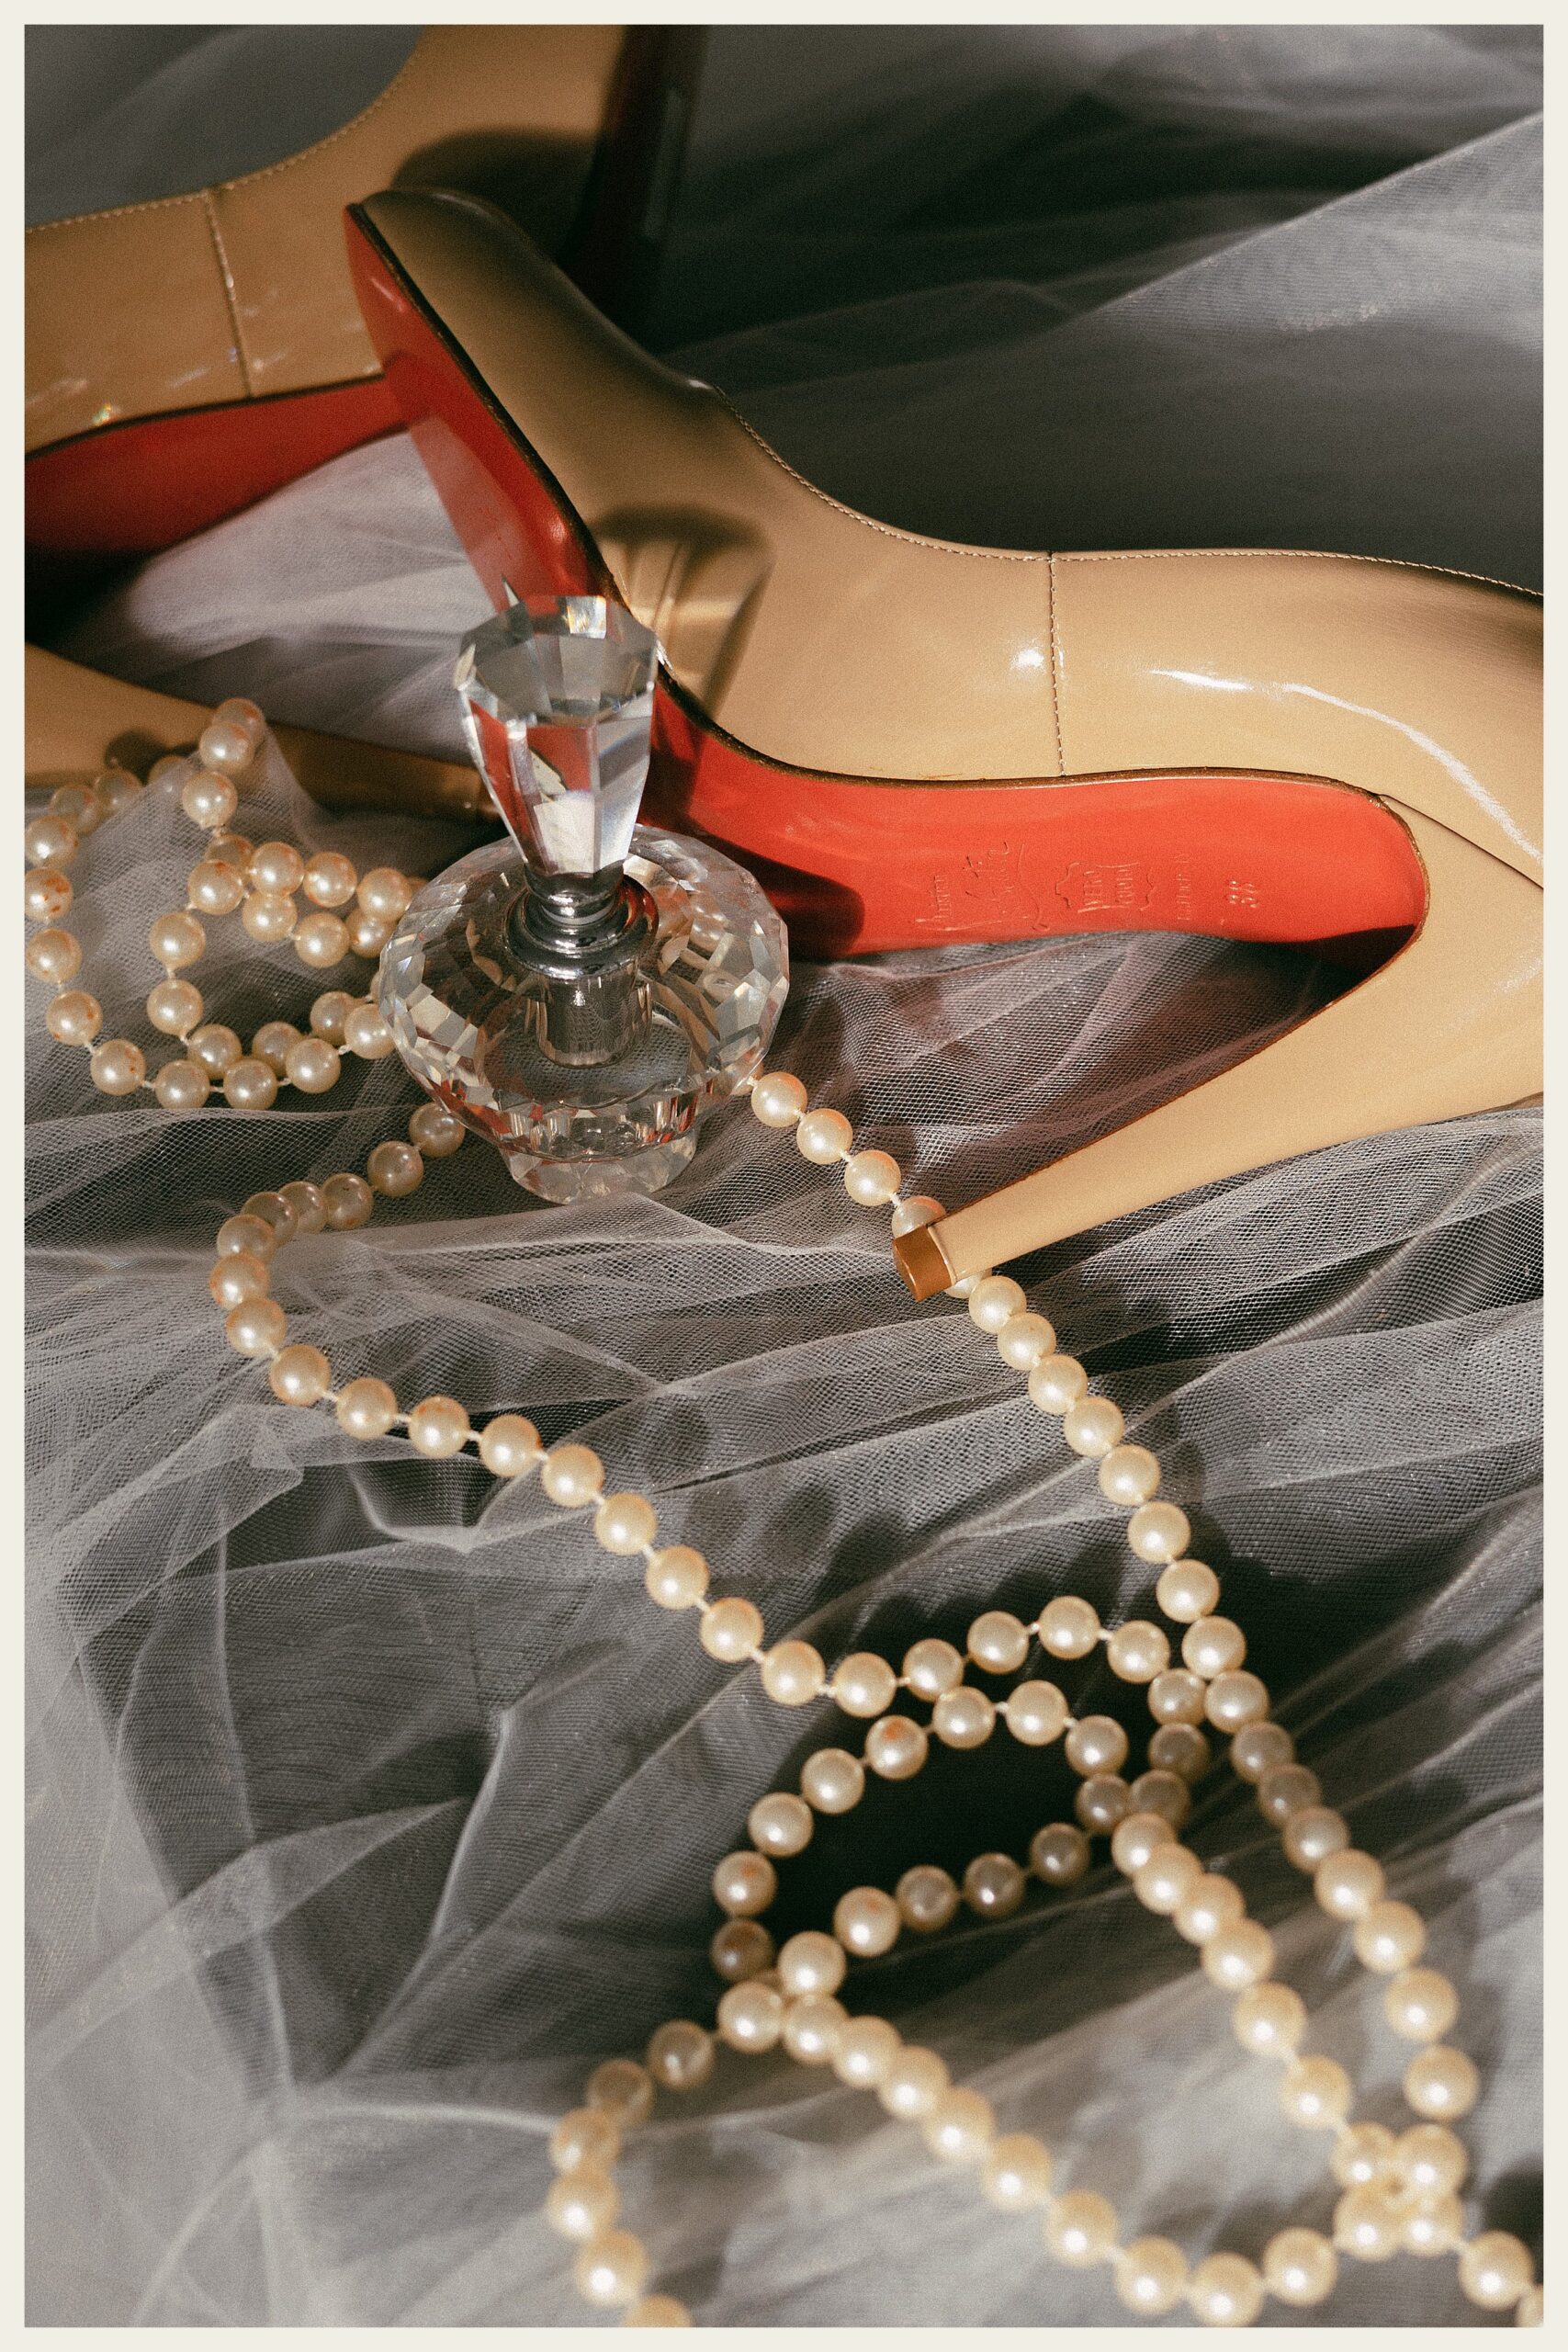 louboutin shoe with perfume bottle and pearl necklace